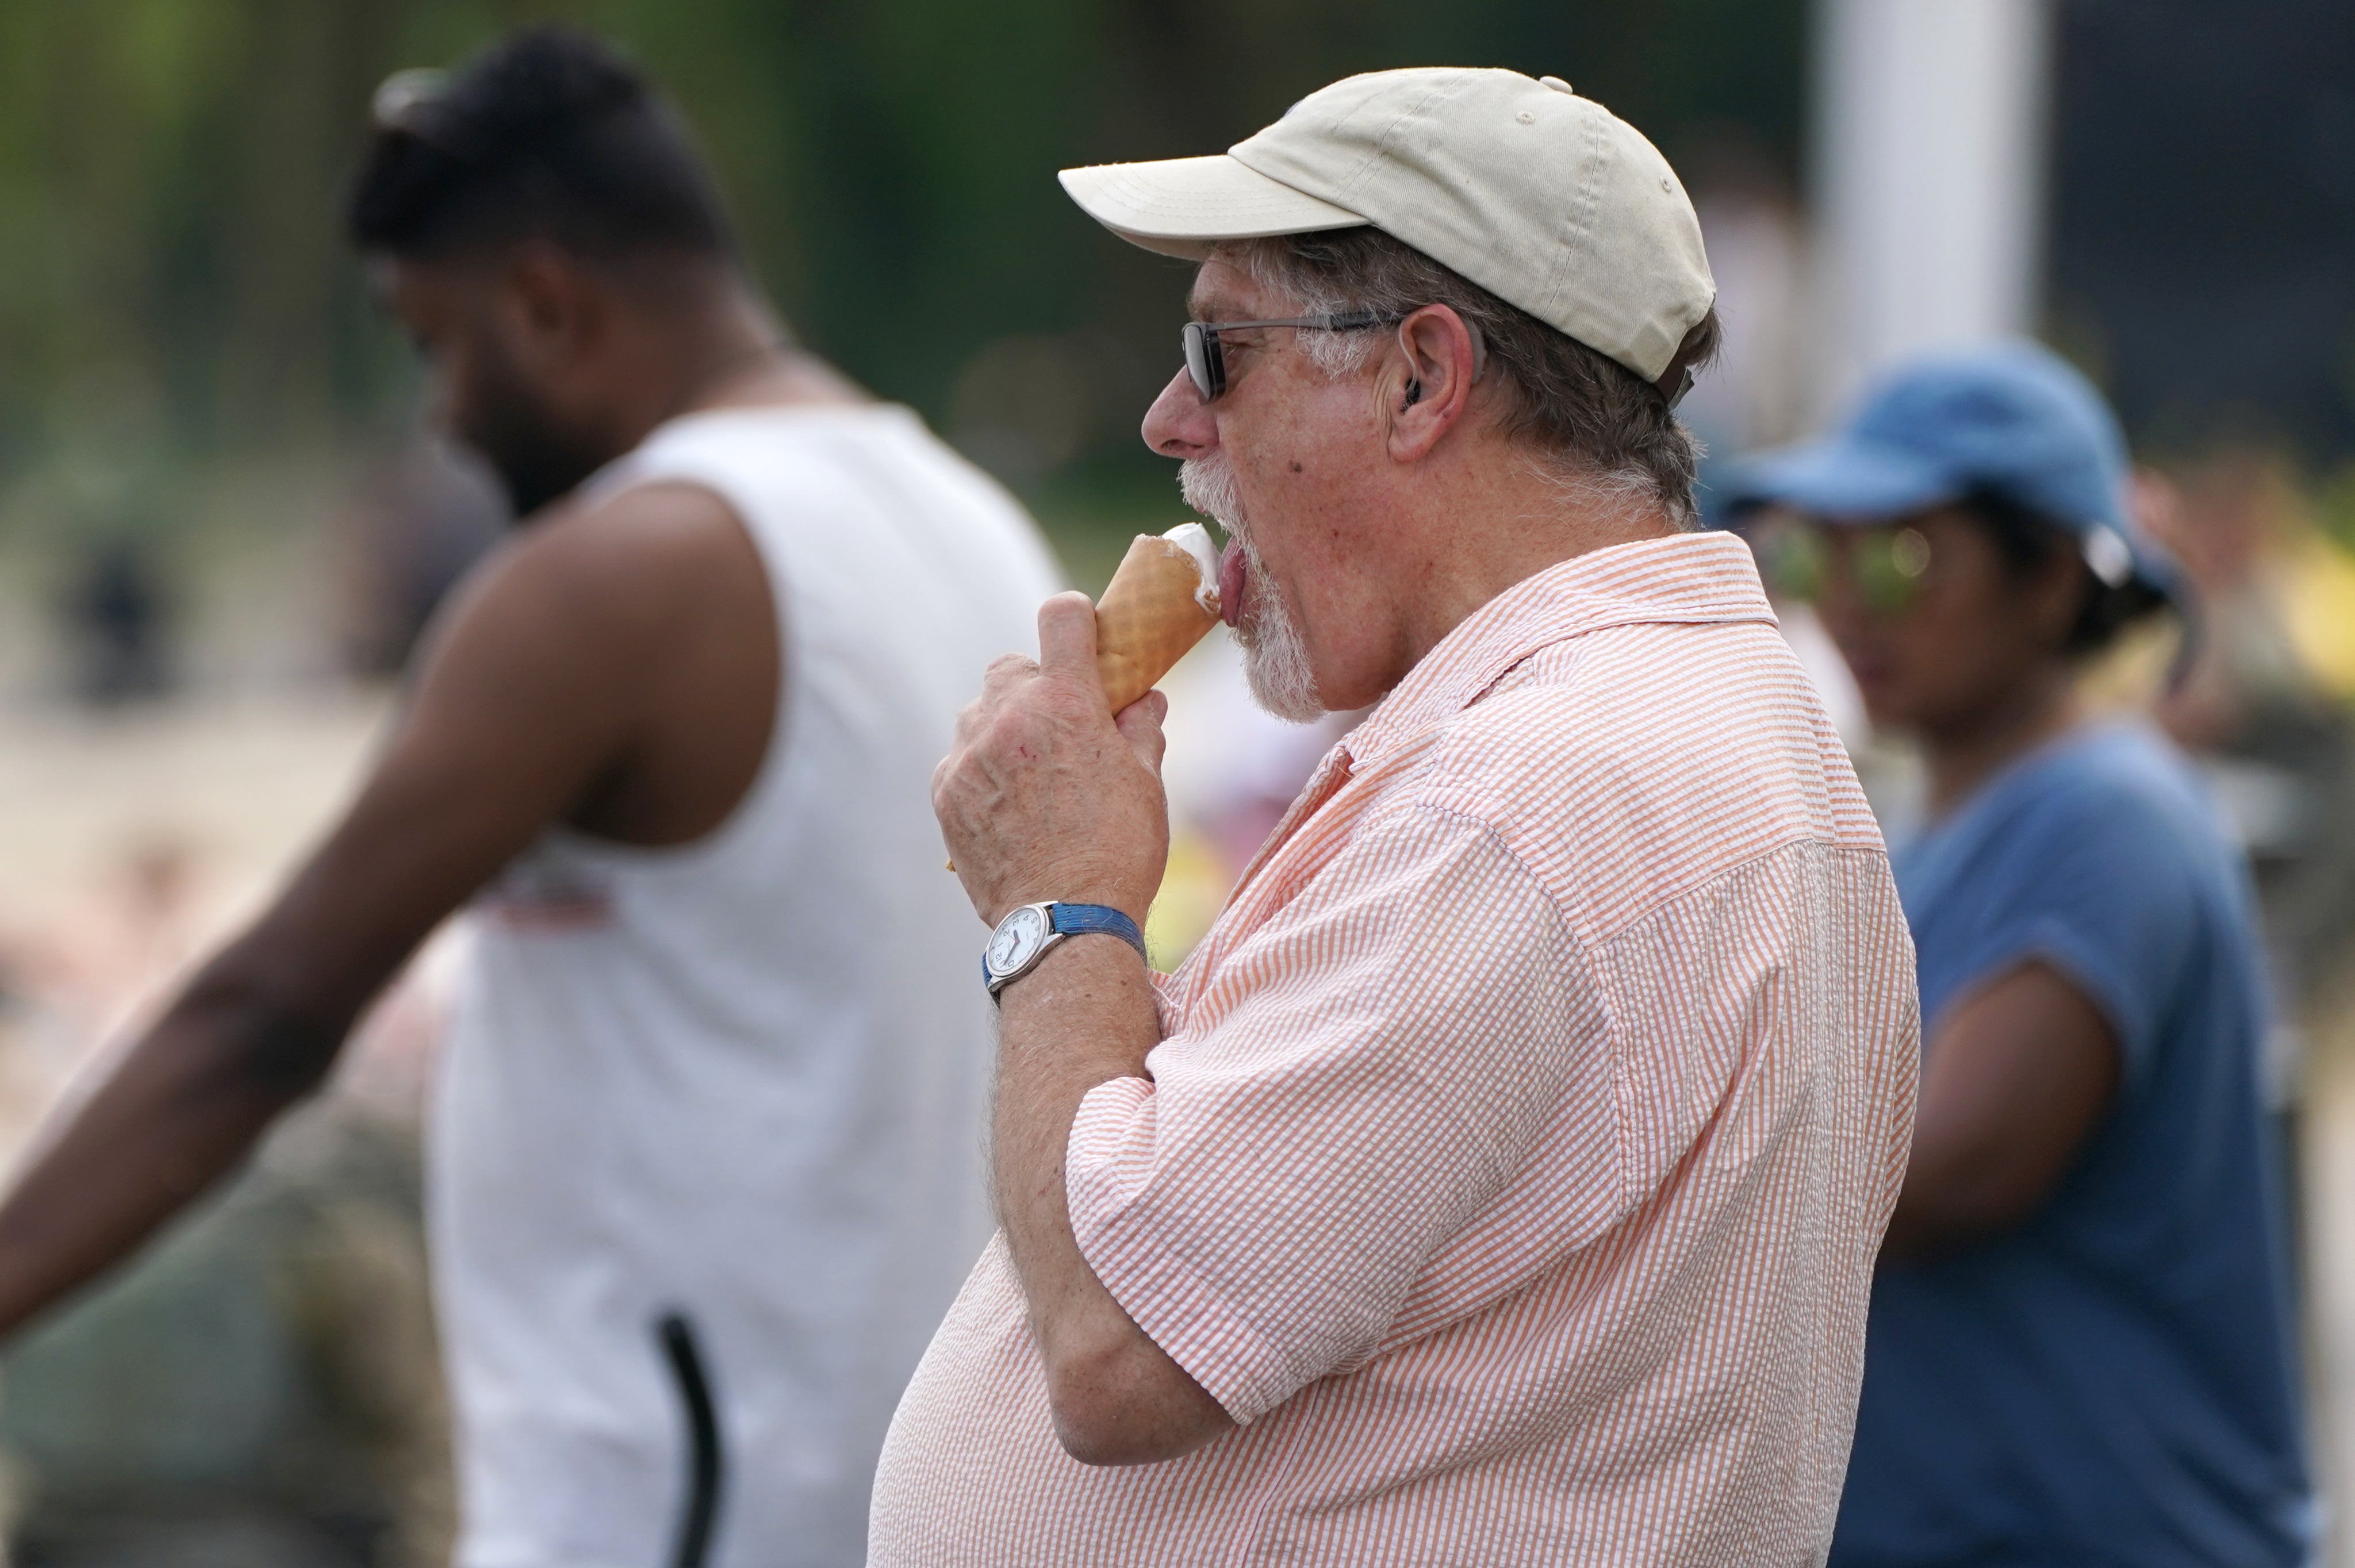 A man eating ice cream at Loch Lomond, in the village of Luss in Argyll and Bute (Andrew Milligan/PA)